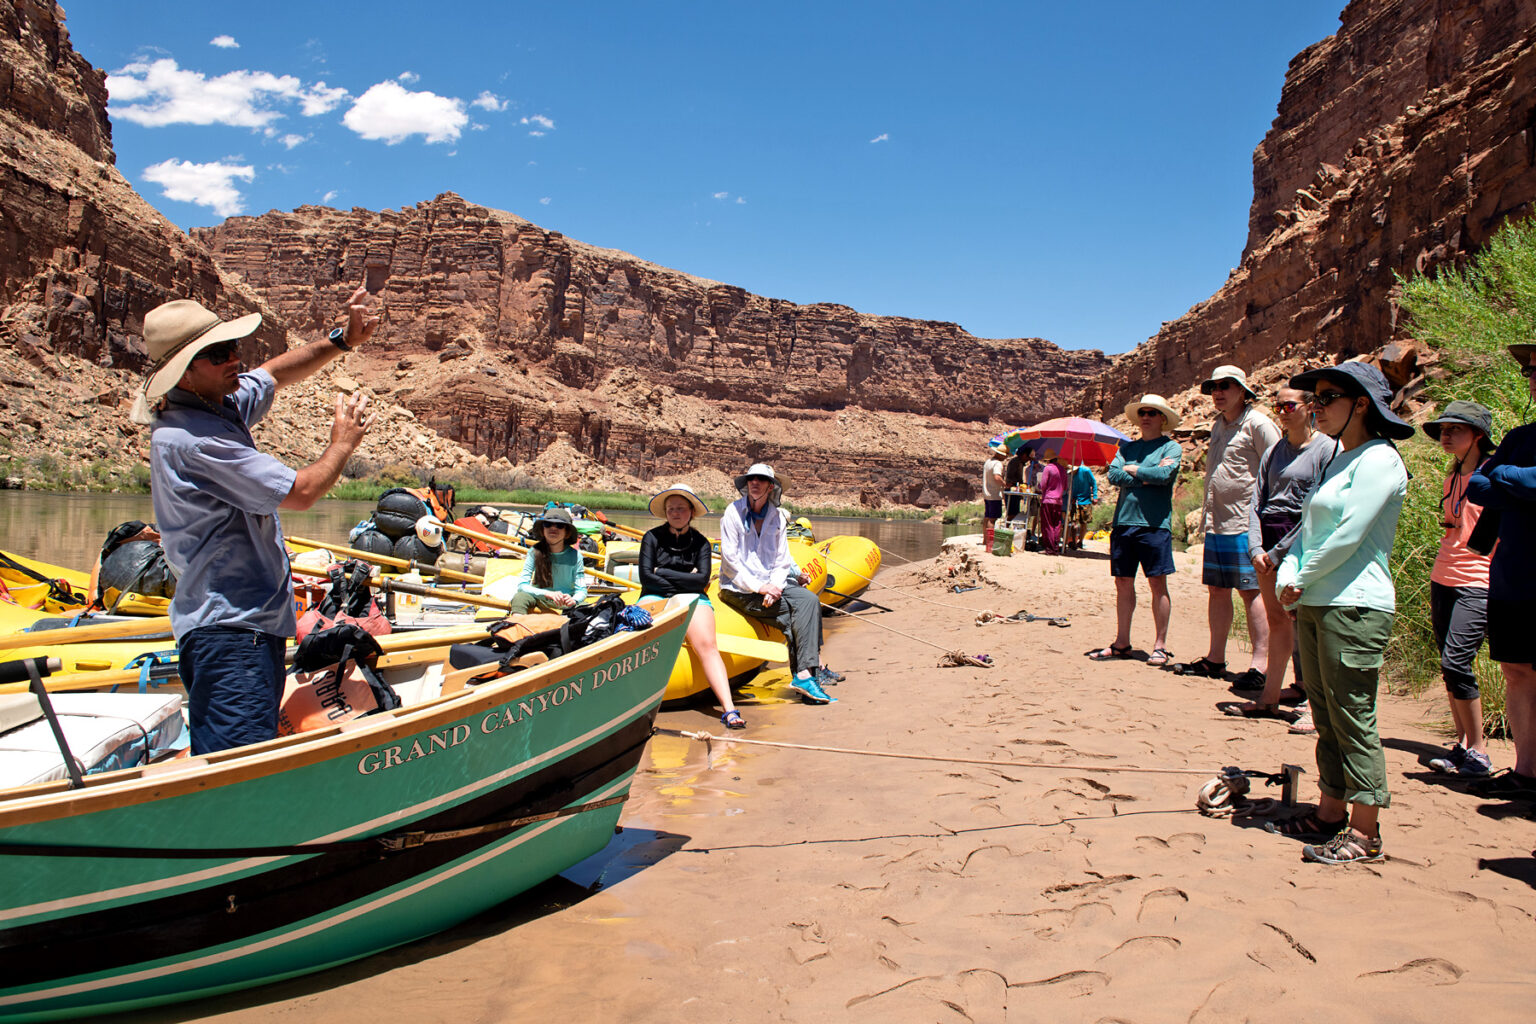 Lunch break on the banks of the Colorado River as OARS guide gives interpretive talk to guests from the bow of a Grand Canyon Dory